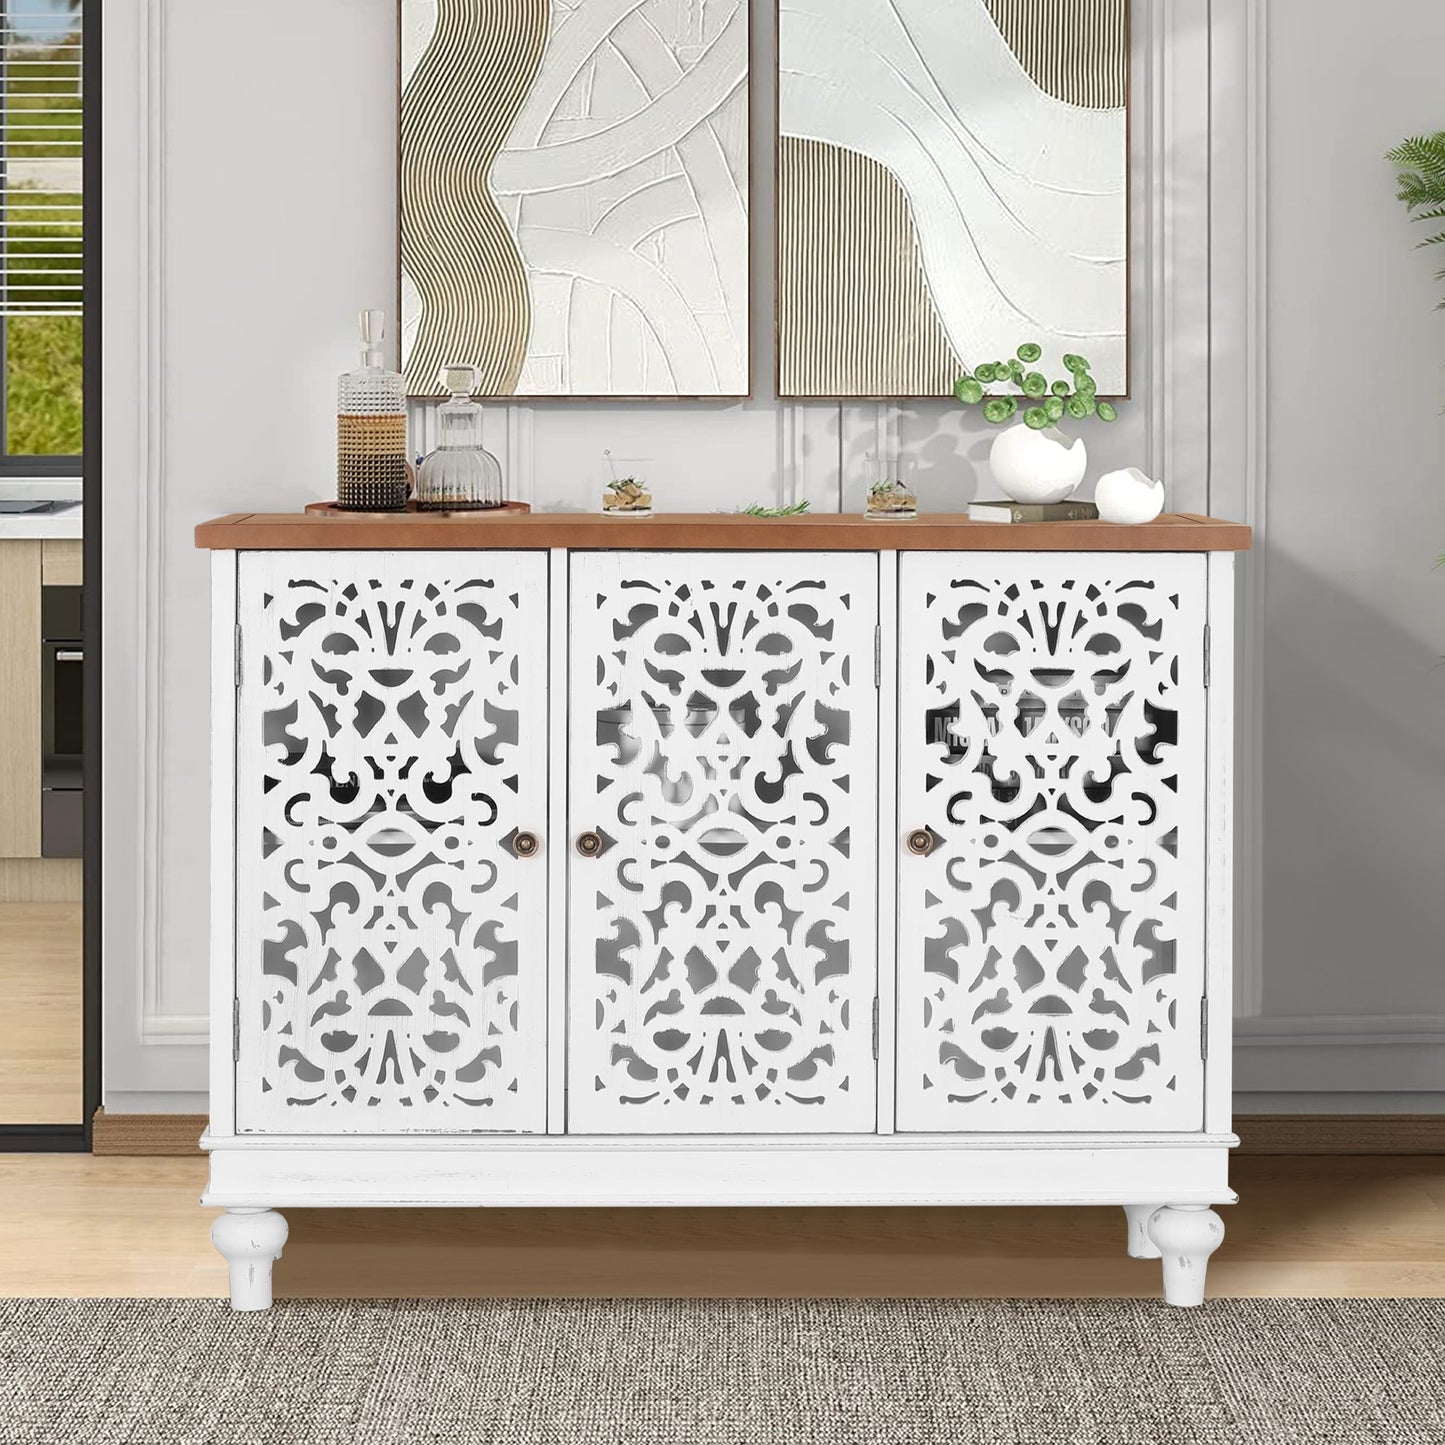 Sophia & William 3-Door Hollow-Carved Sideboard Accent Cabinet for Kitchen, Dining Room, Living Room, Entryway-White